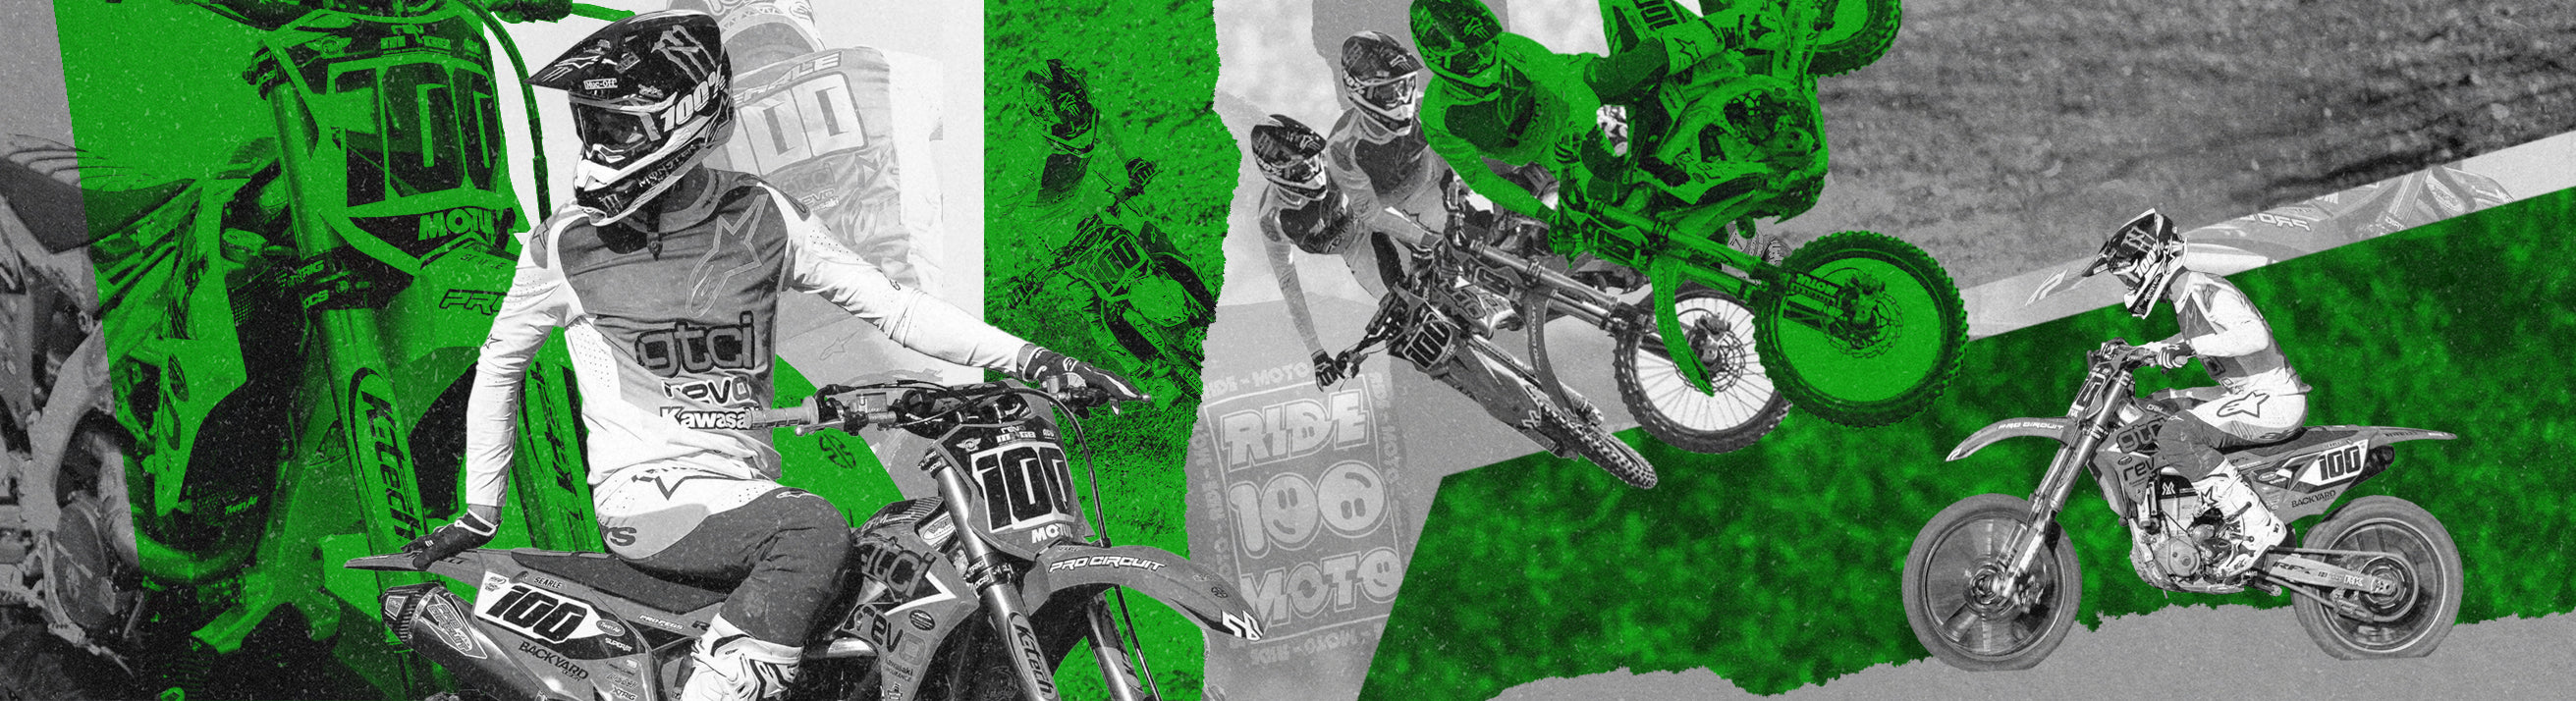 Tommy Searle Merchandise